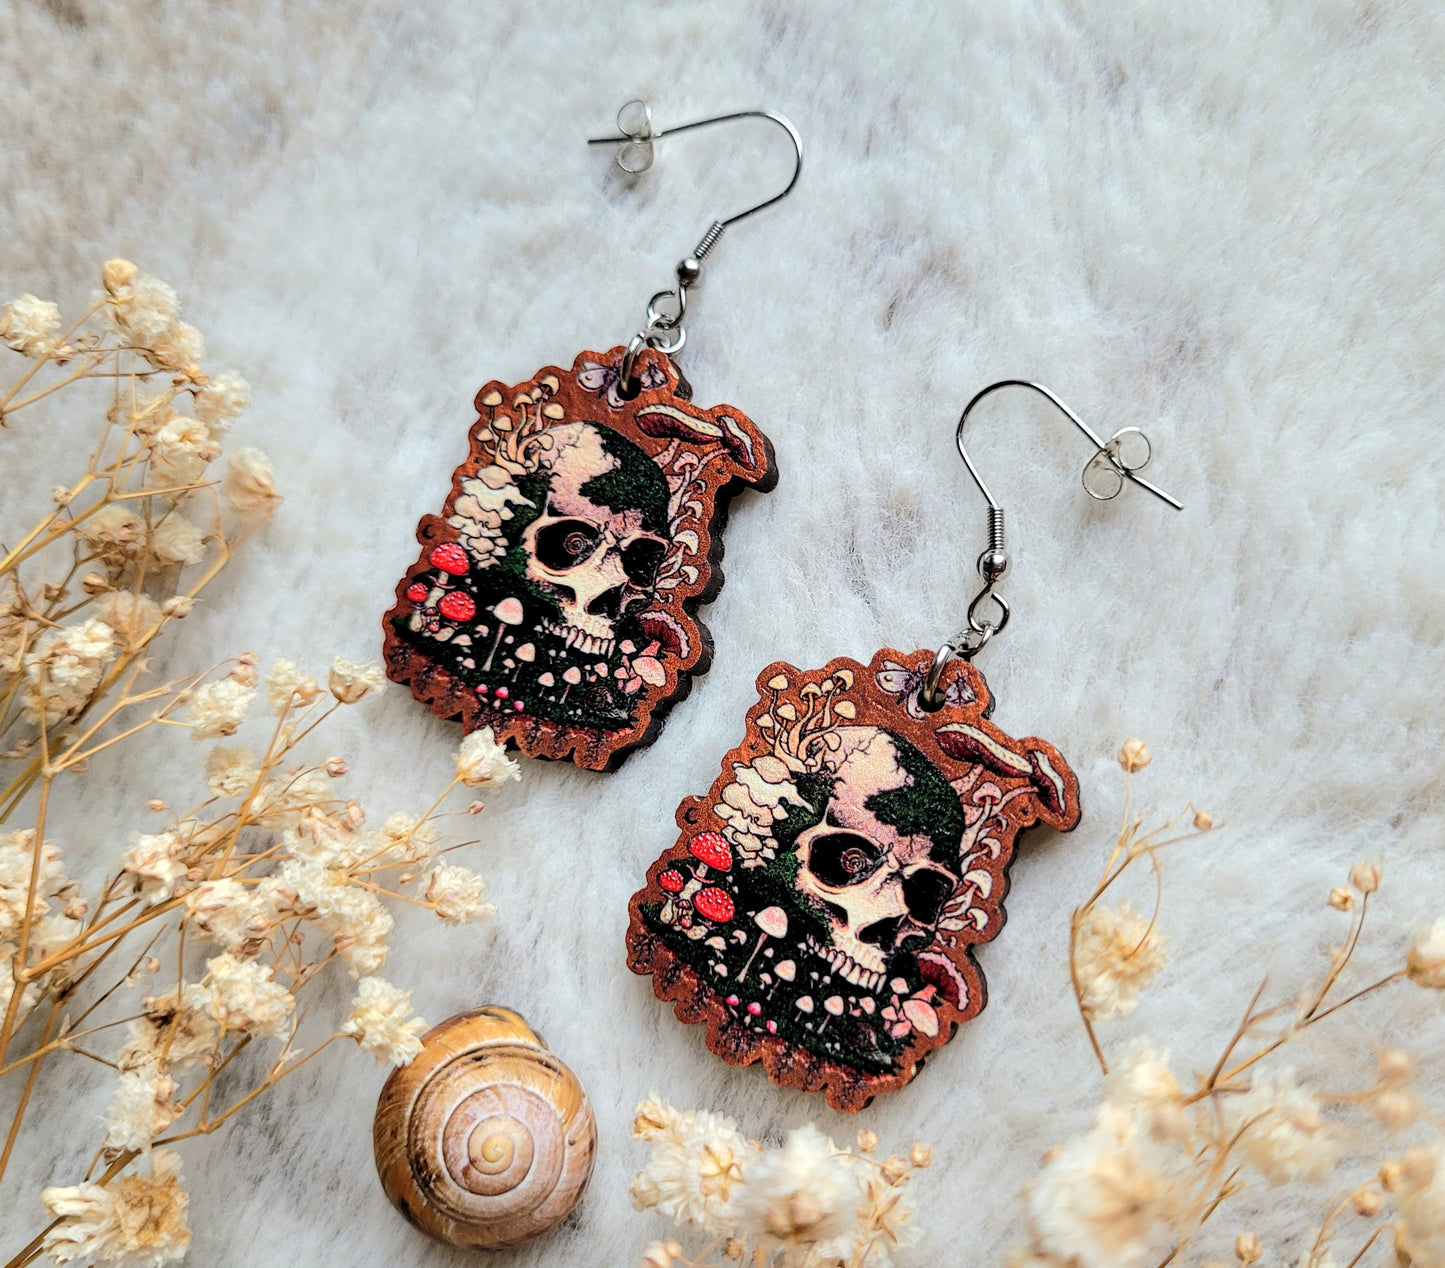 Here lies a Fungi illustrated earrings, responsibly sourced cherry wood, 304 Stainless Steel hooks, by Grace Moth